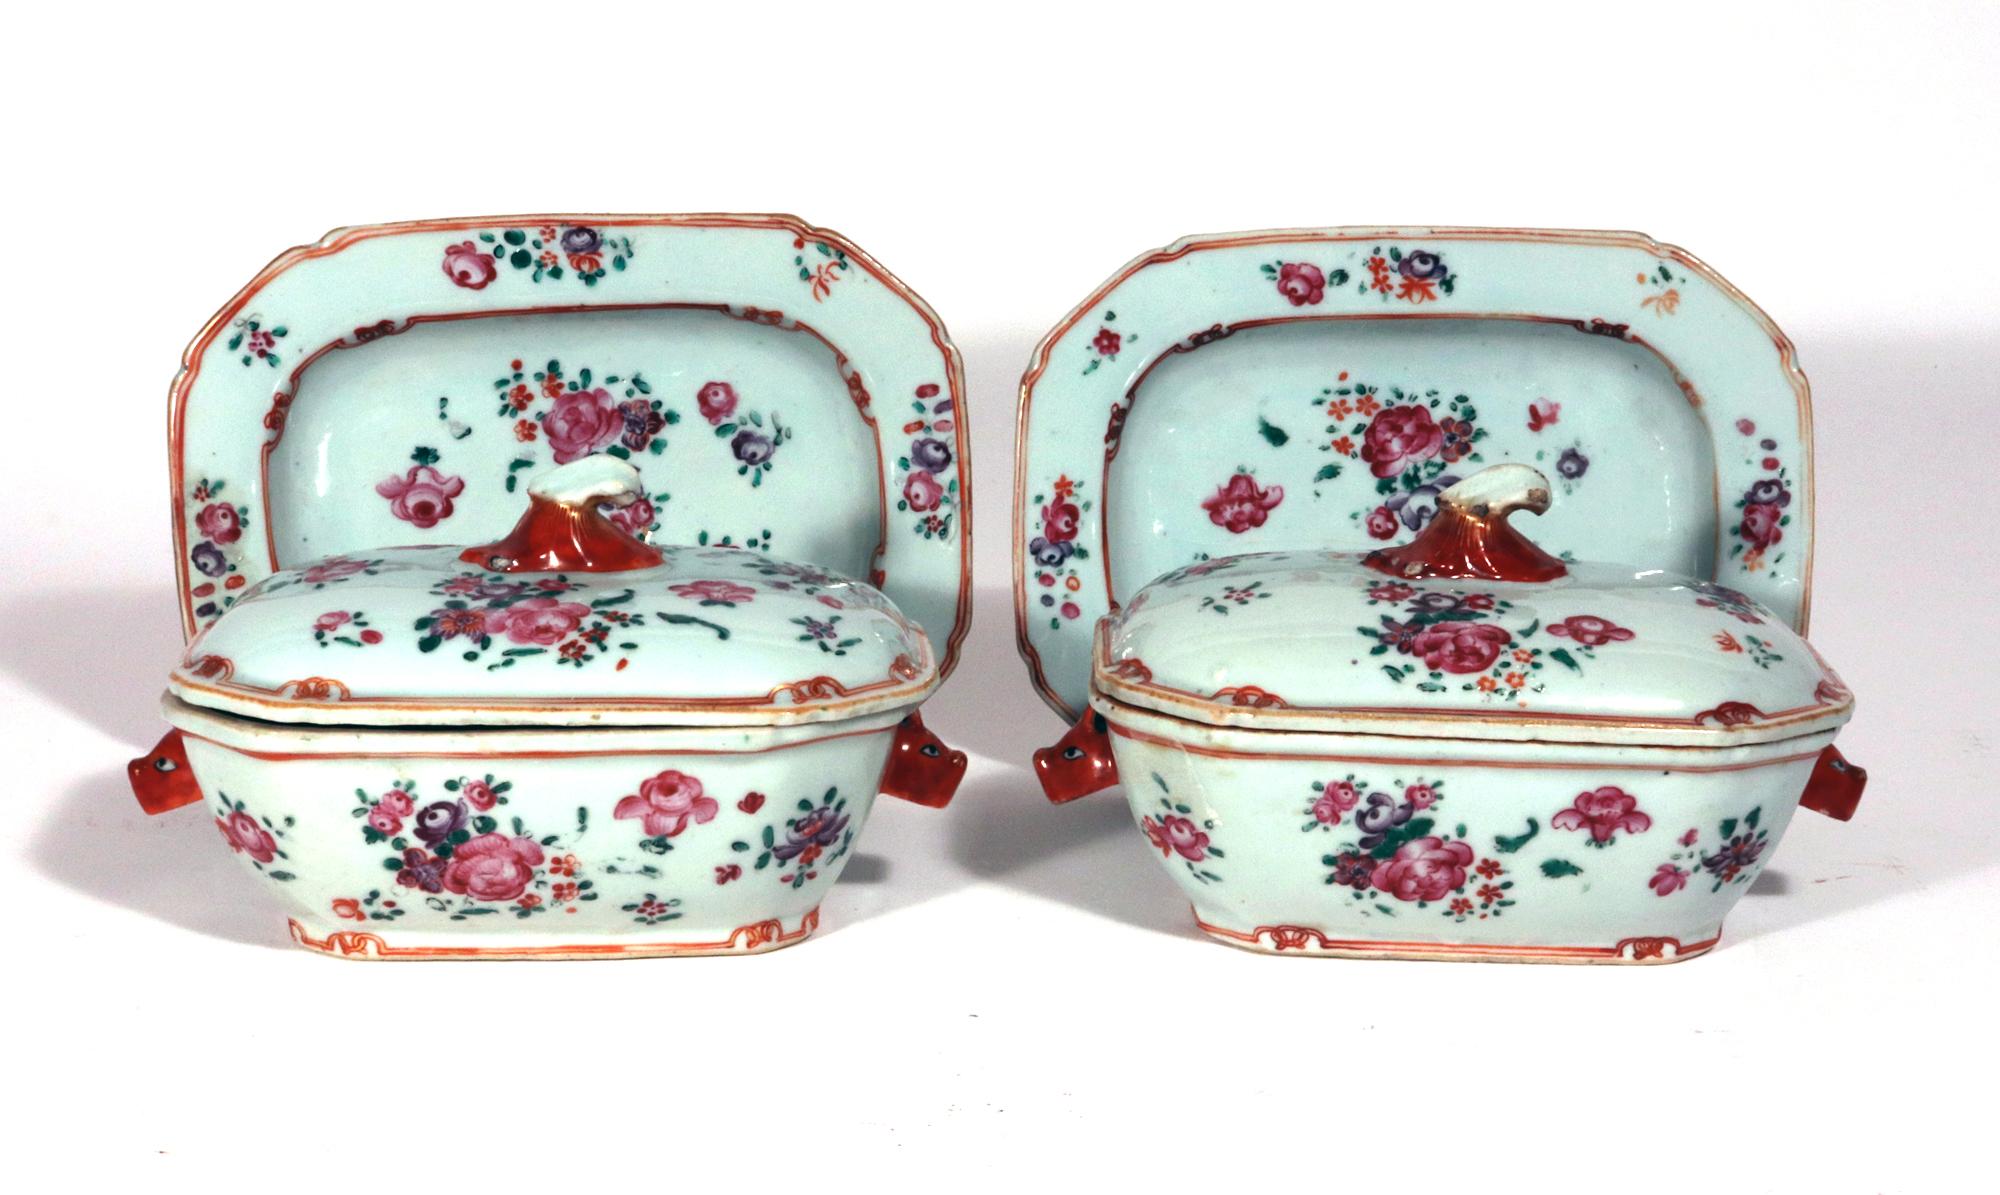 Chinese Export Porcelain Famille Rose Sauce Tureens, Covers & Stands In Good Condition For Sale In Downingtown, PA